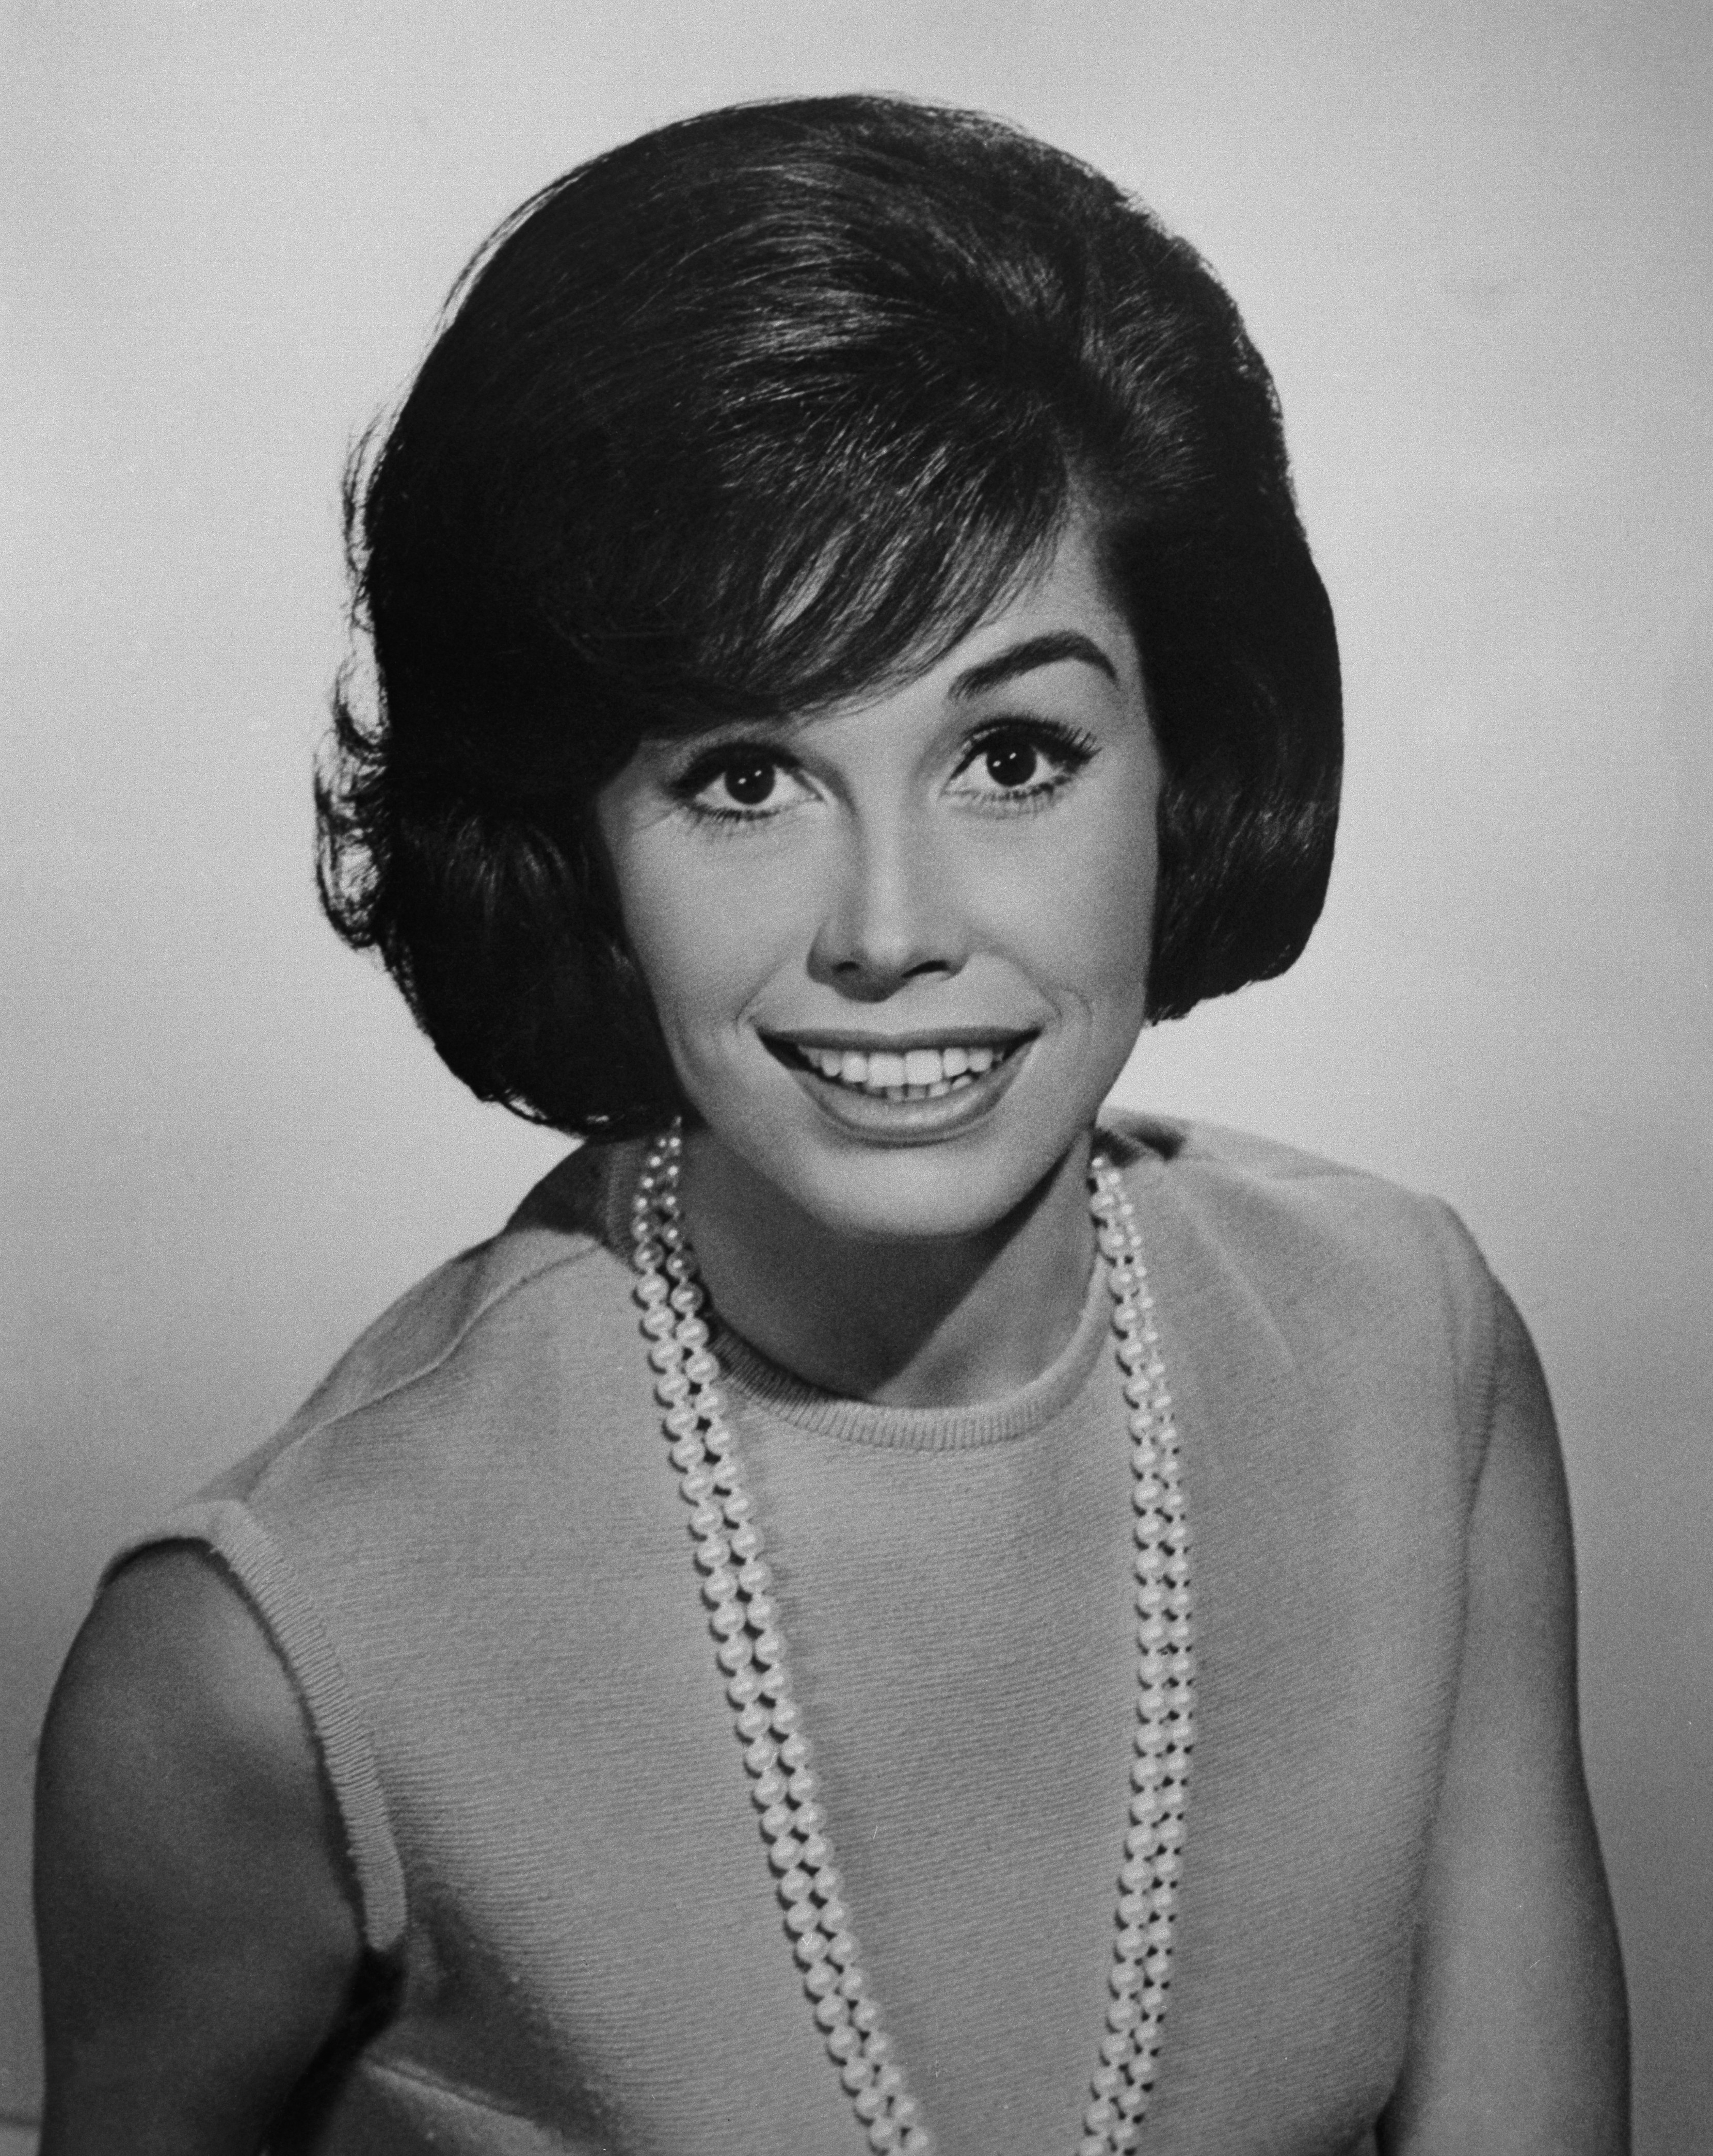 Publicity handout of smiling television actress Mary Tyler Moore. Circa 1970 | Source: Getty Images